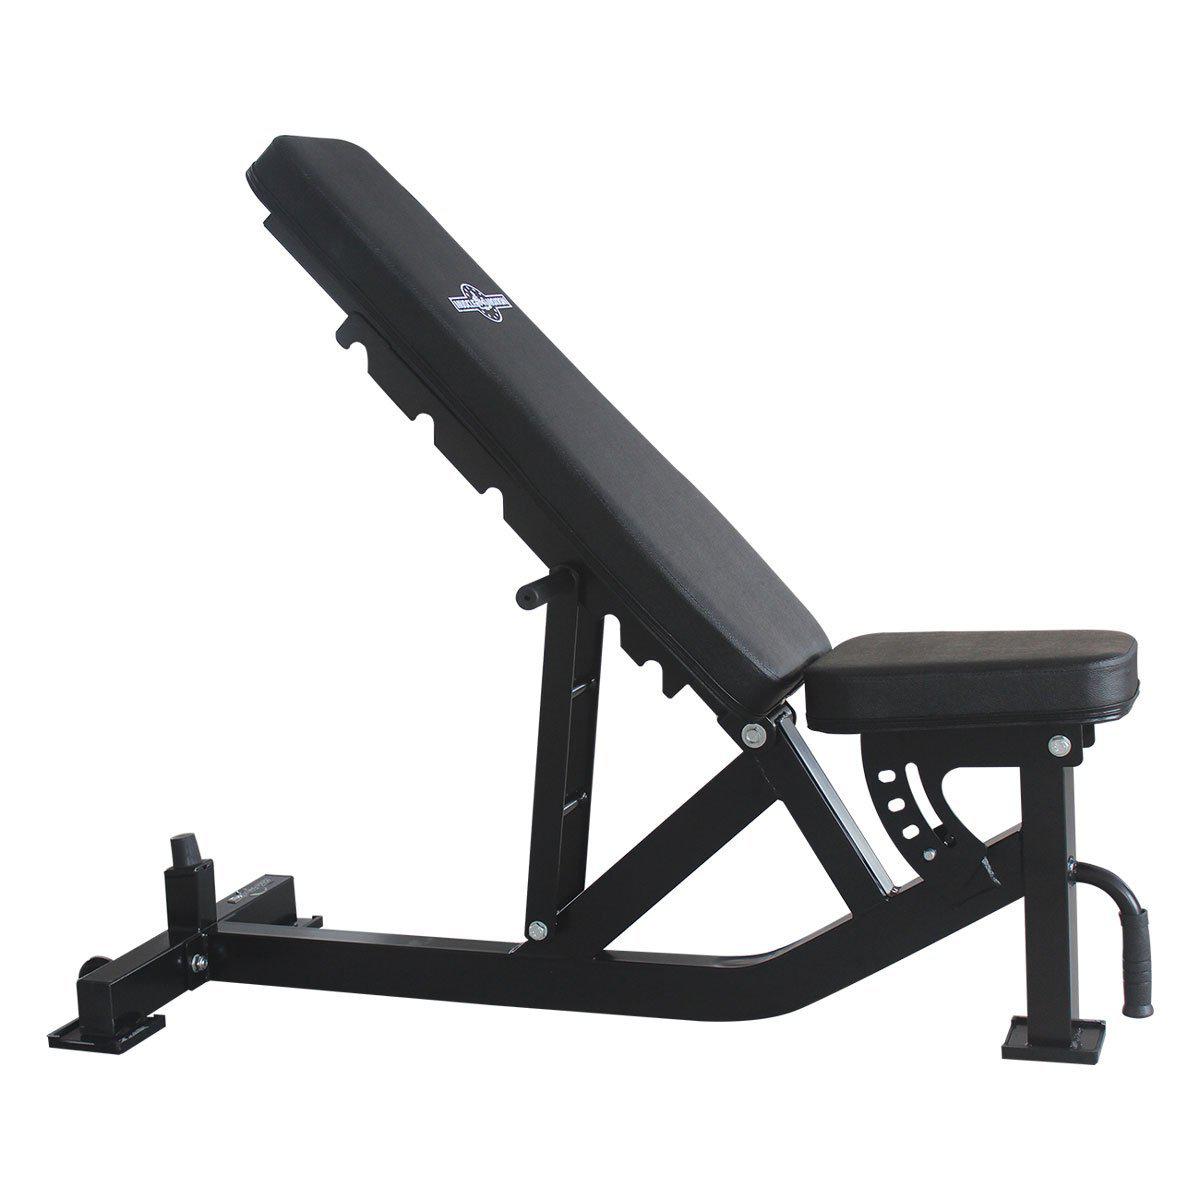 Muscle Motion PR1012 Package - Power Rack + Bench + Bar + 77.5kg Olympic weights